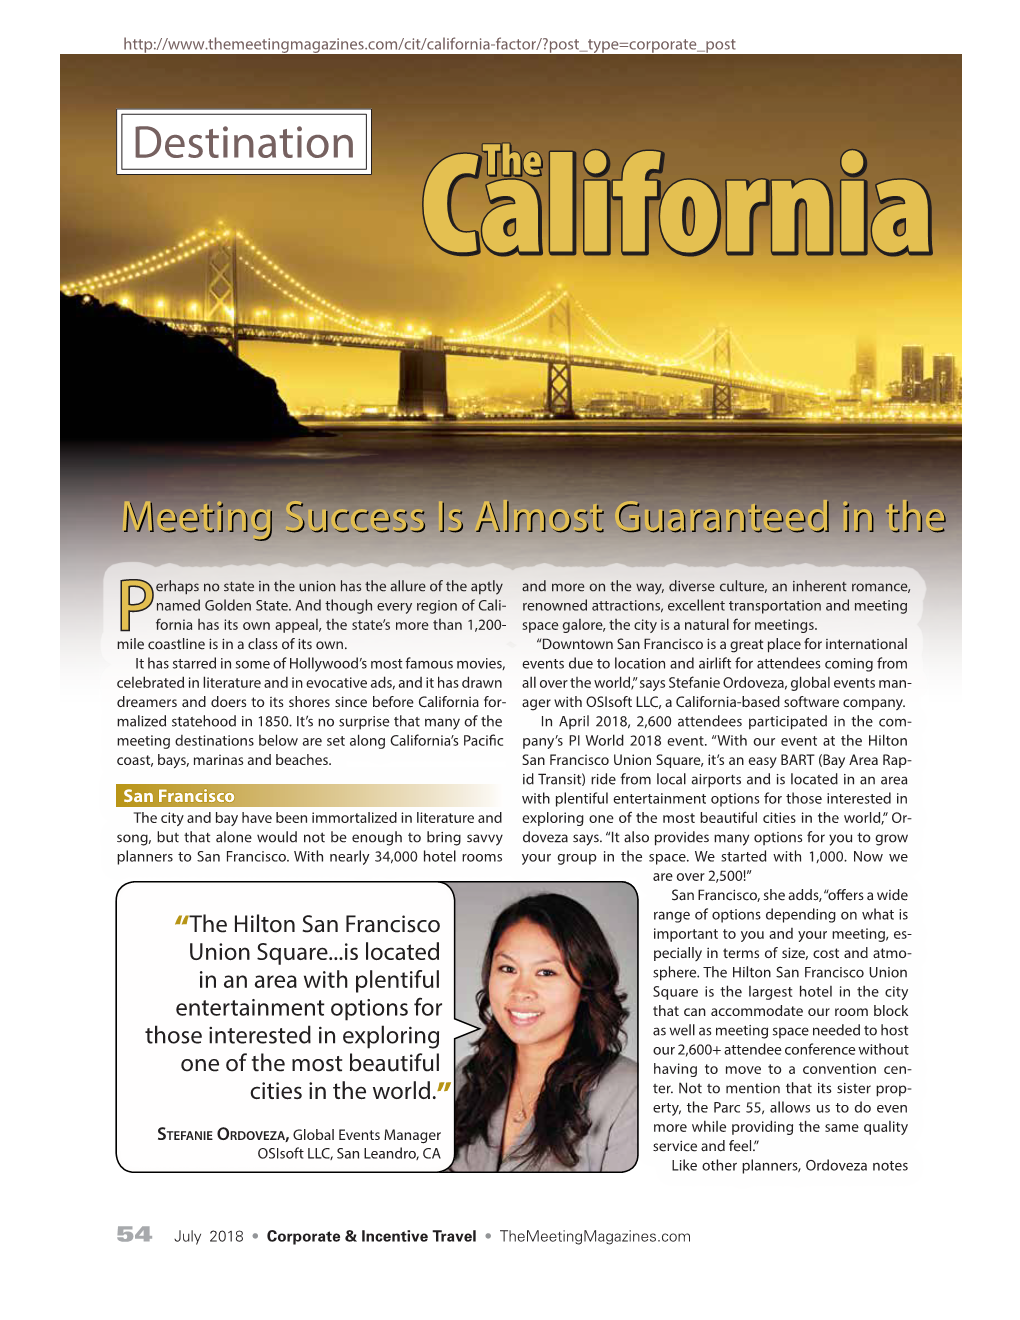 The California Factor July 1, 2018 Corporate